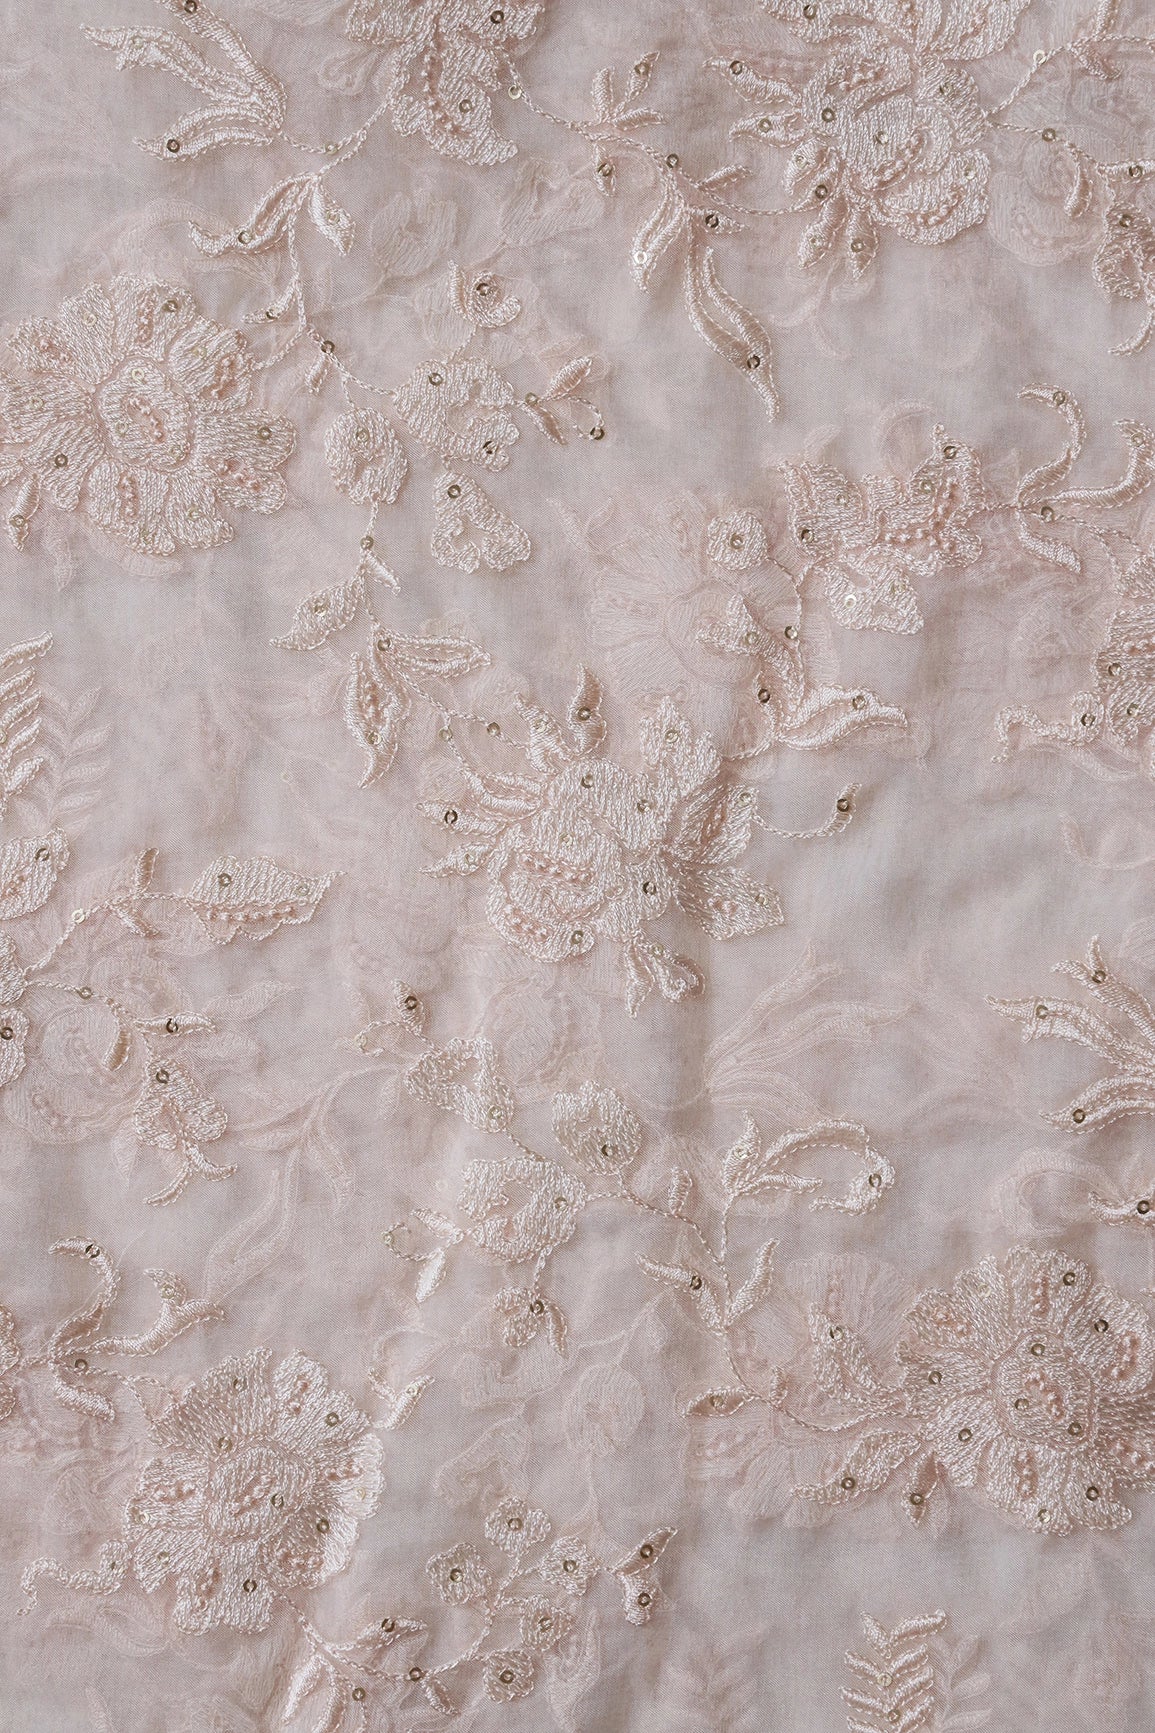 Beautiful White Thread With Sequins Floral Embroidery Work On White Organza Fabric